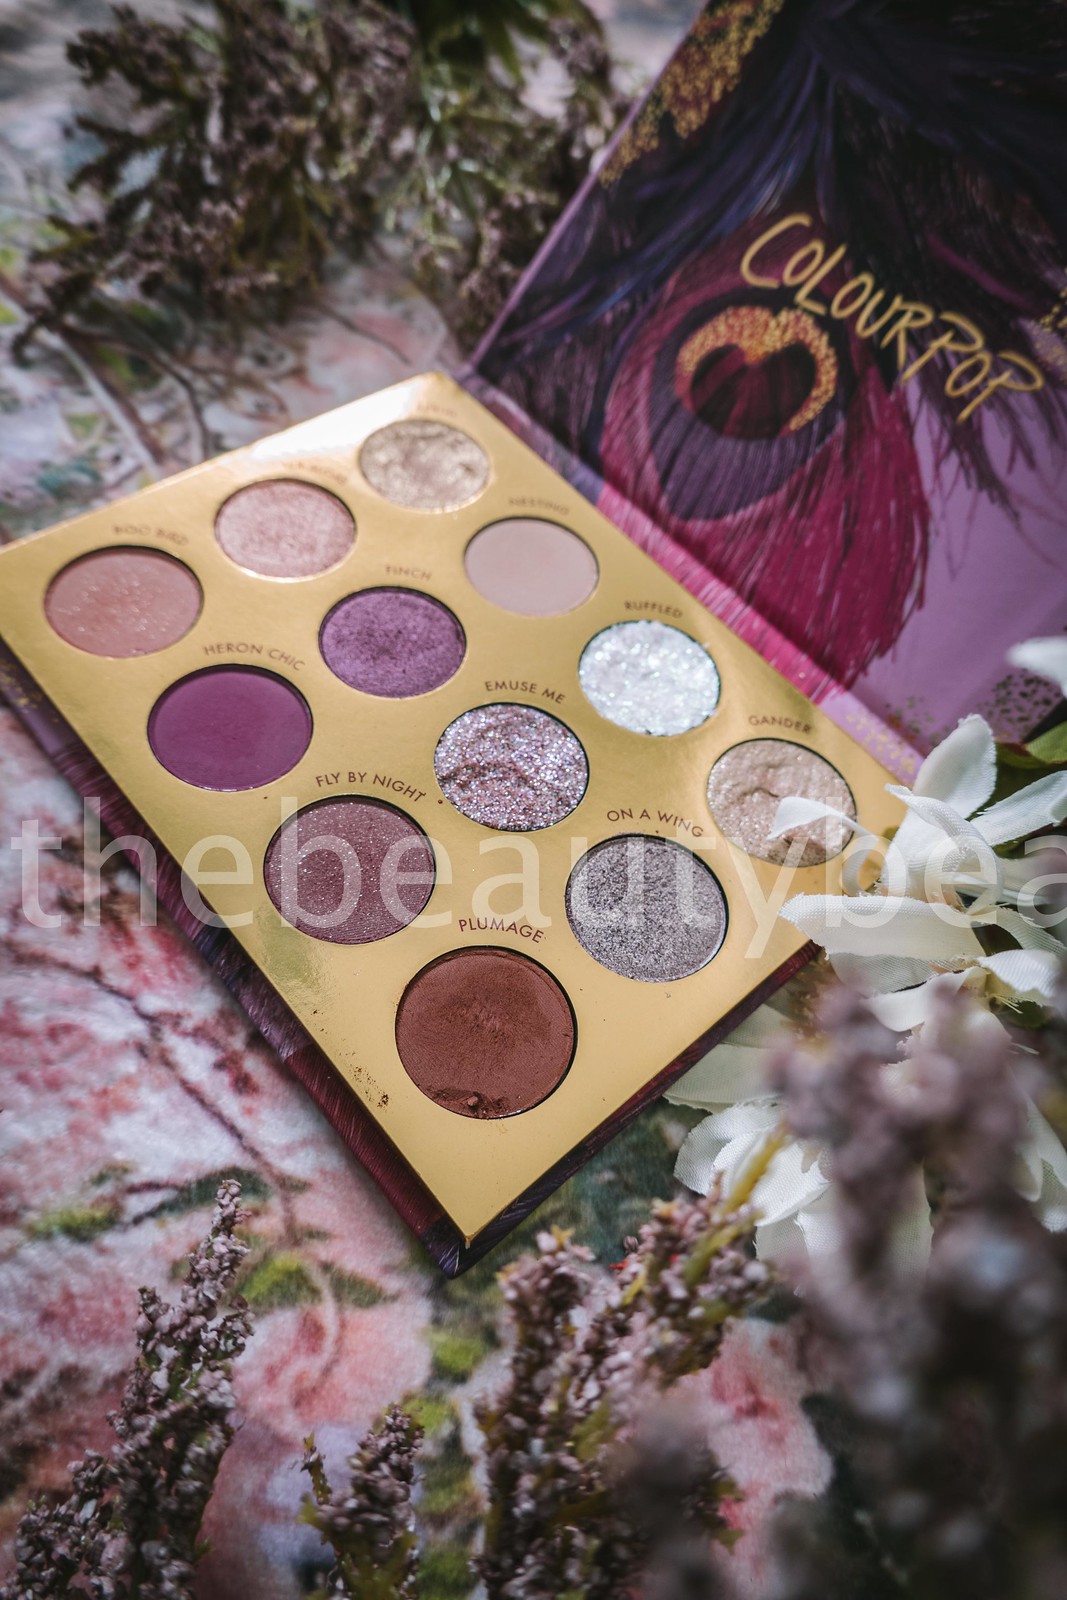 colourpop bye bye birdie review with swatches